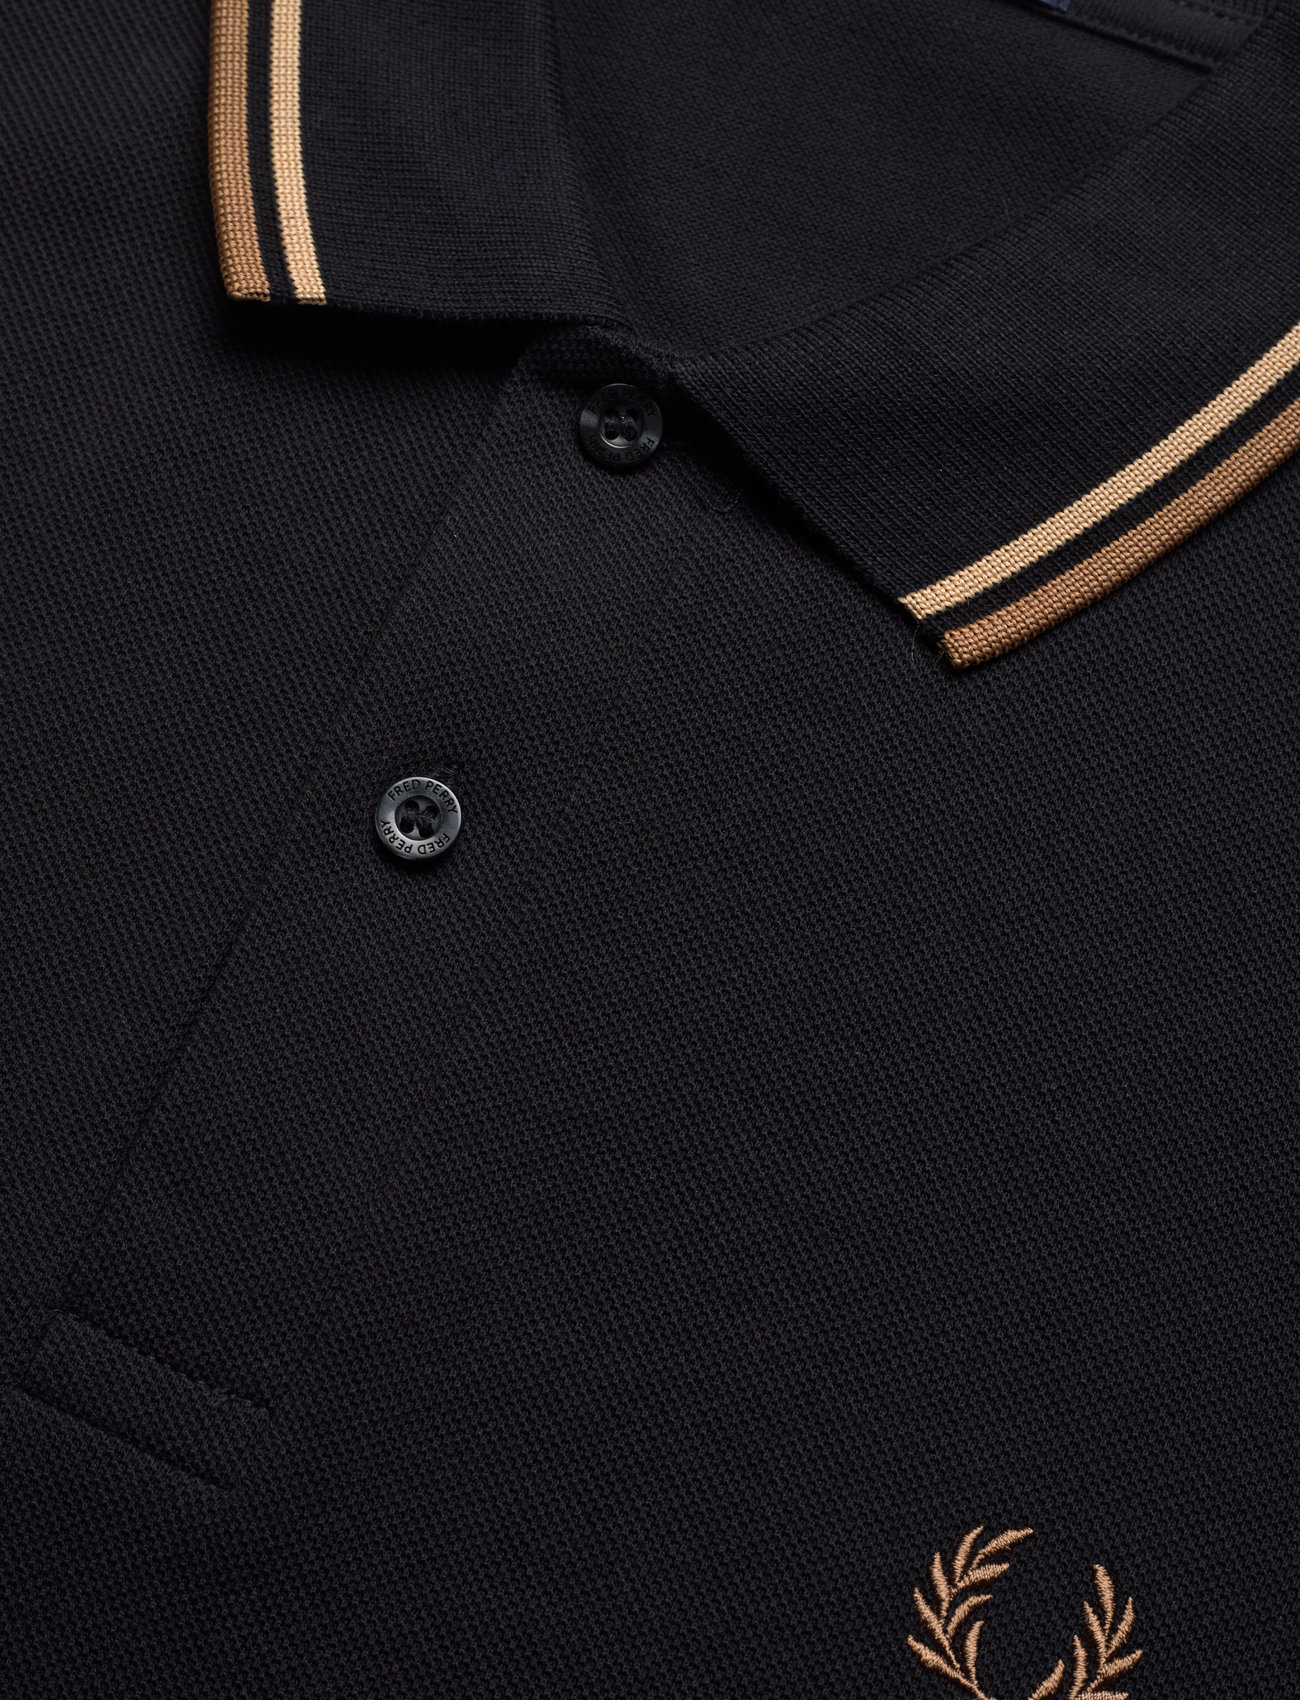 Fred Perry - TWIN TIPPED FP SHIRT - kortermede - bk/wrmston/shdst - 1